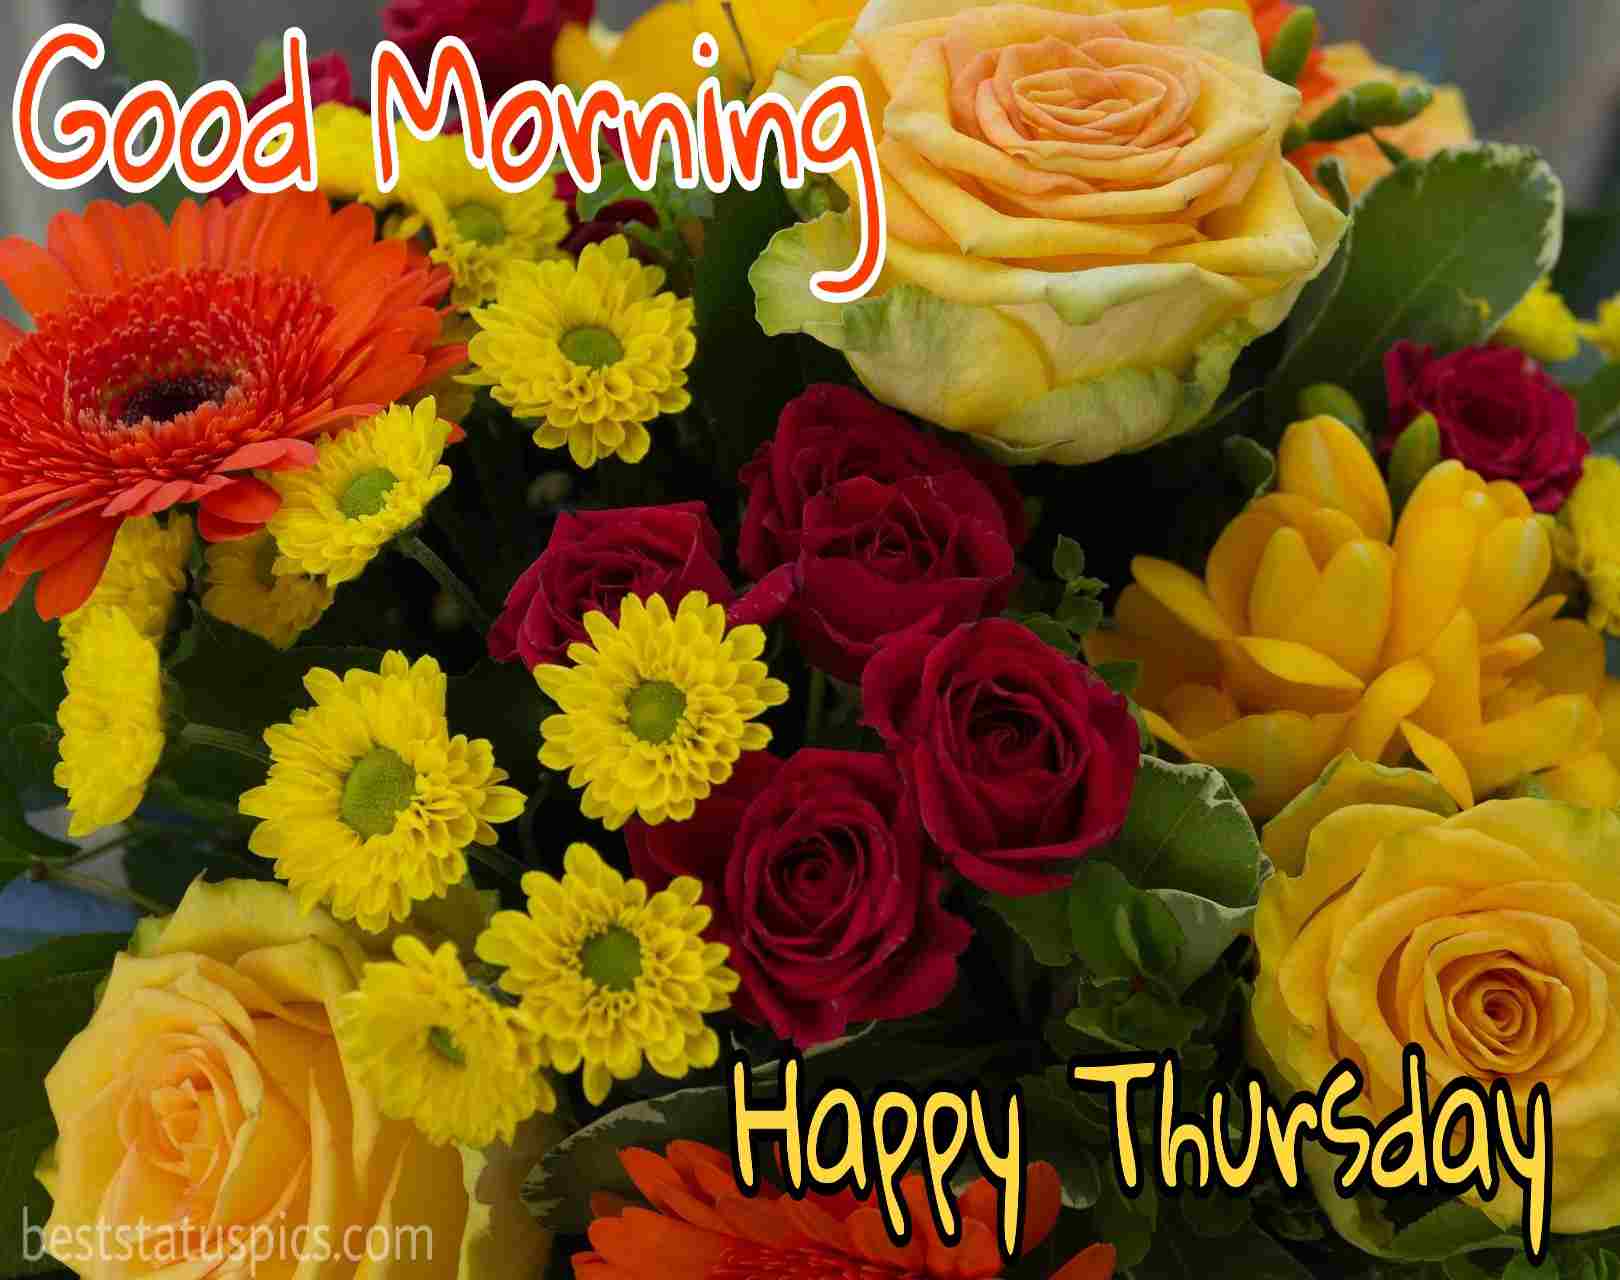 Good Morning Happy Thursday Image, Wishes, Quotes Status Pics